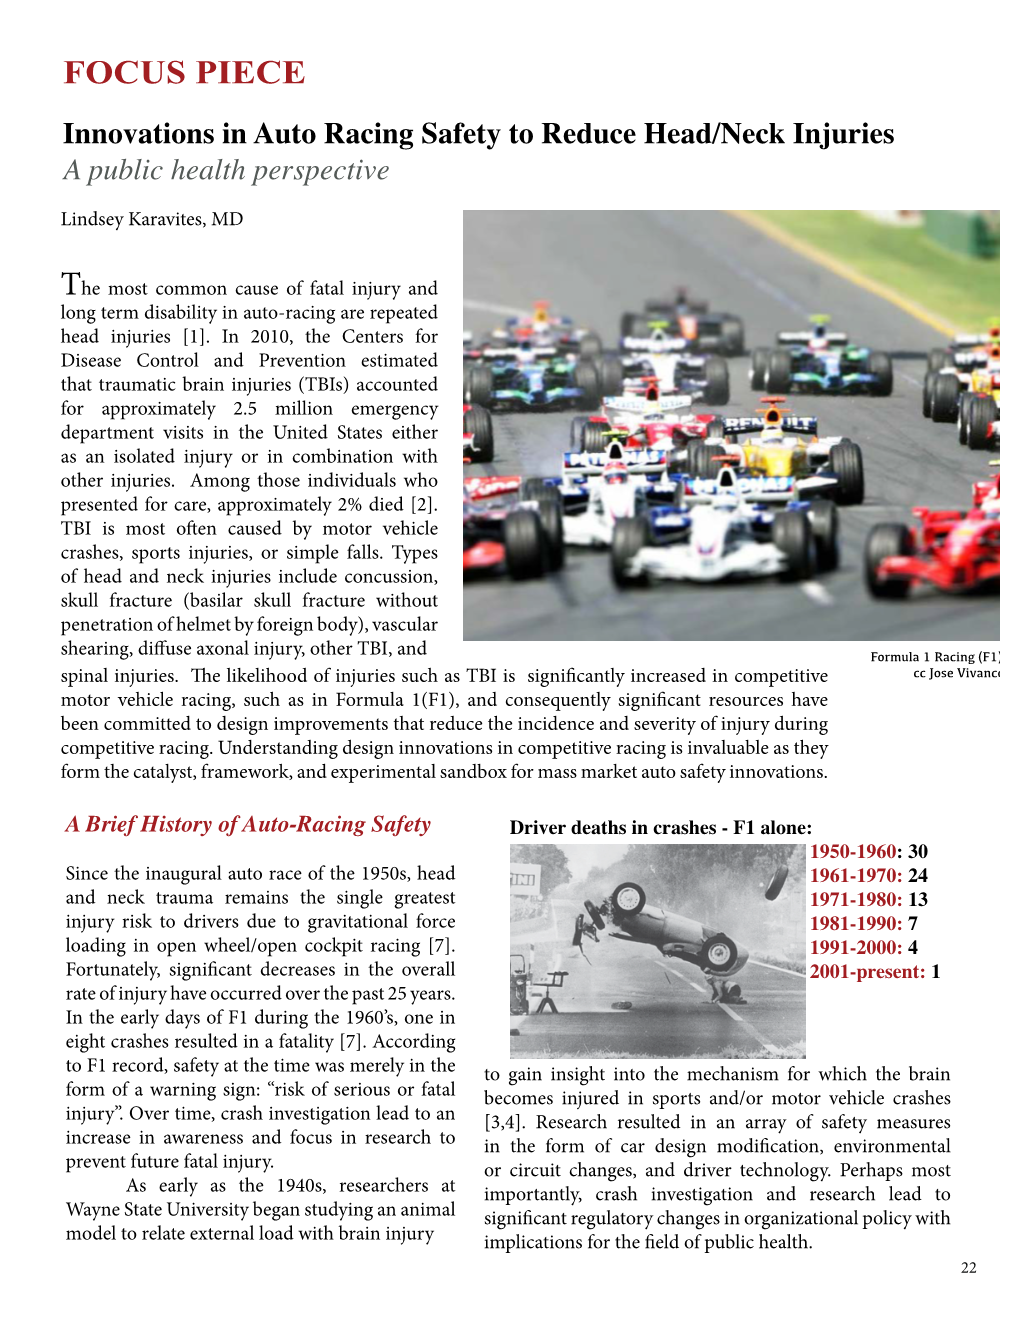 FOCUS PIECE Innovations in Auto Racing Safety to Reduce Head/Neck Injuries a Public Health Perspective